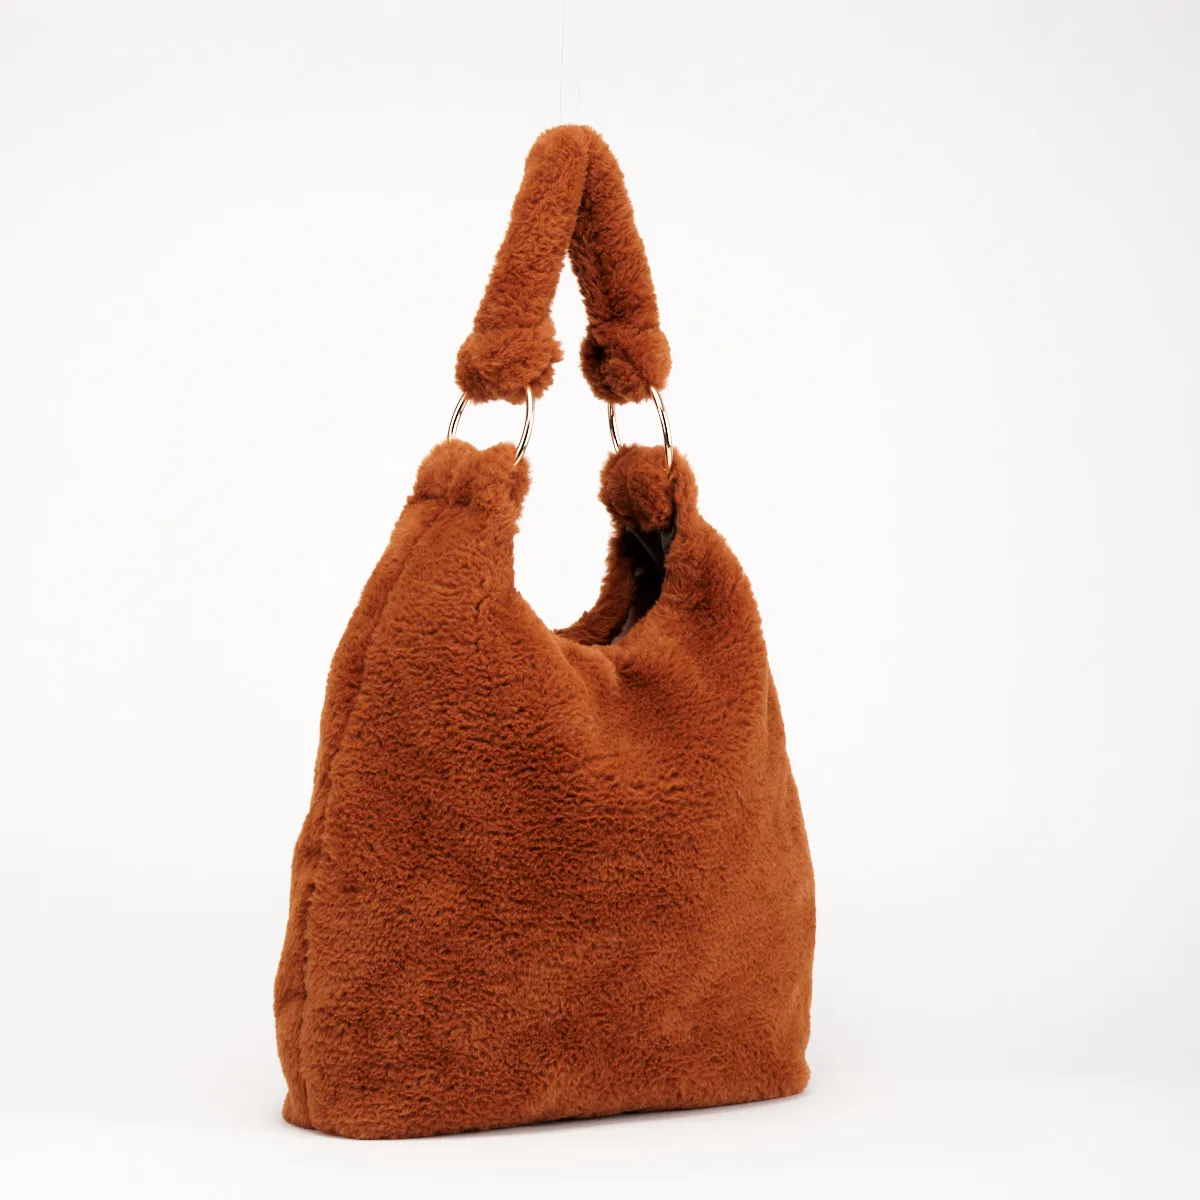 Cork-coloured Fake Fur Tote Bag with Metal Rings on the Handle| Women Accessories| Women Fashion